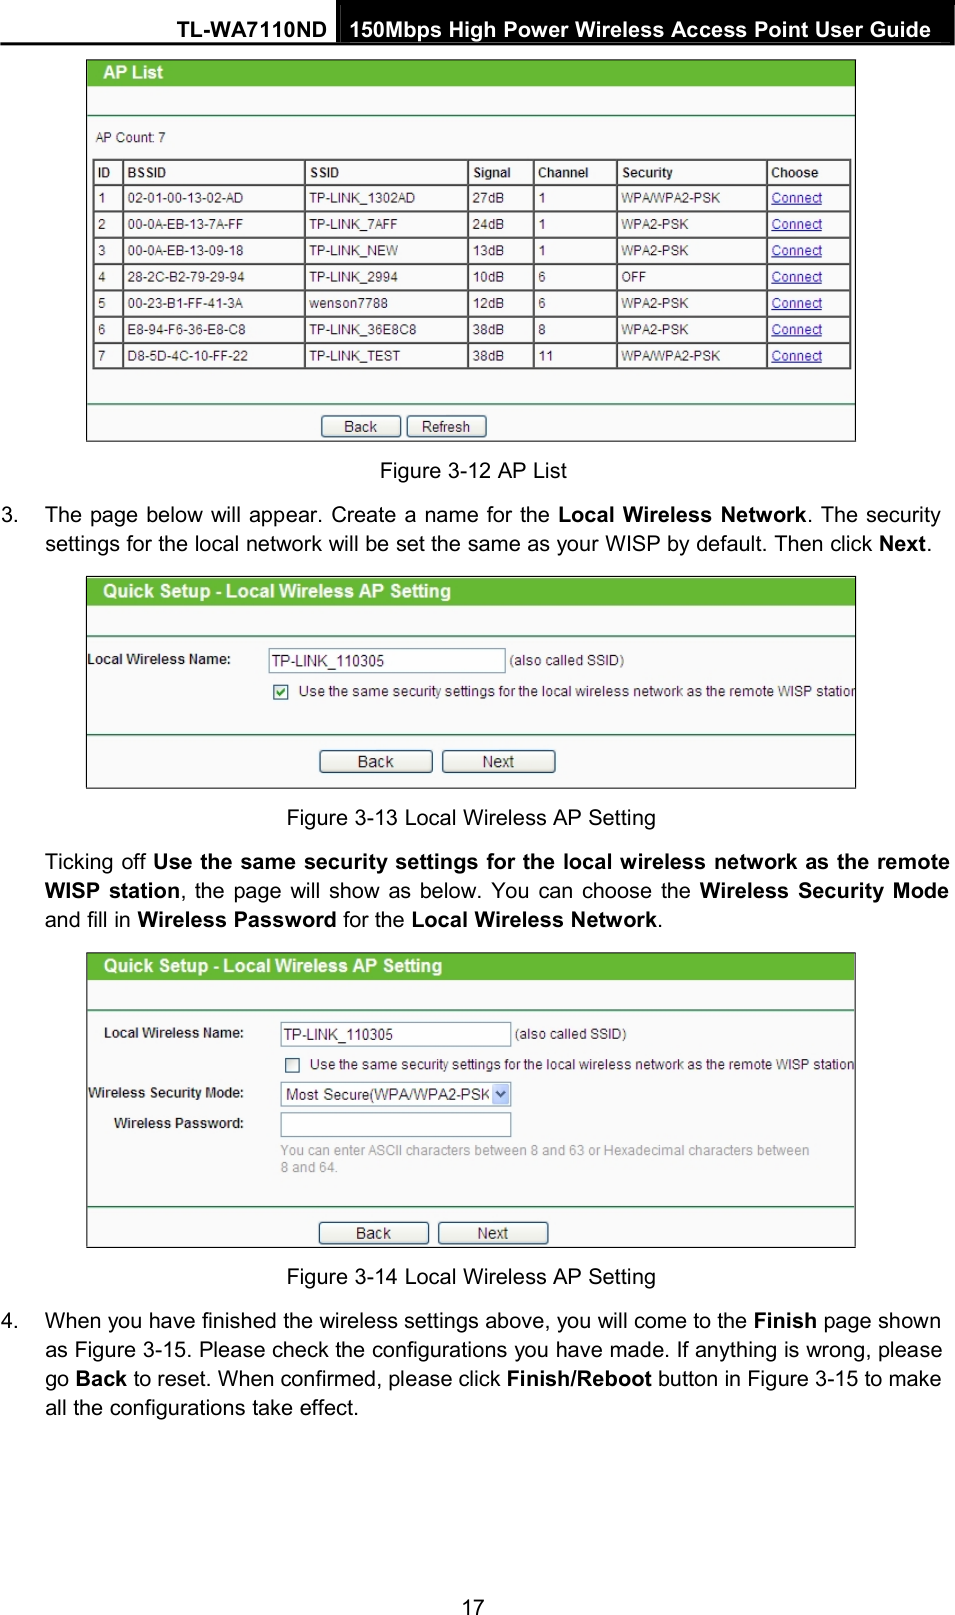 TL-WA7110ND 150Mbps High Power Wireless Access Point User GuideFigure 3-12 AP List3. The page below will appear. Create a name for the Local Wireless Network. The securitysettings for the local network will be set the same as your WISP by default. Then click Next.Figure 3-13 Local Wireless AP SettingTicking off Use the same security settings for the local wireless network as the remoteWISP station, the page will show as below. You can choose the Wireless Security Modeand fill in Wireless Password for the Local Wireless Network.Figure 3-14 Local Wireless AP Setting4. When you have finished the wireless settings above, you will come to the Finish page shownas Figure 3-15. Please check the configurations you have made. If anything is wrong, pleasego Back to reset. When confirmed, please click Finish/Reboot button in Figure 3-15 to makeall the configurations take effect.17